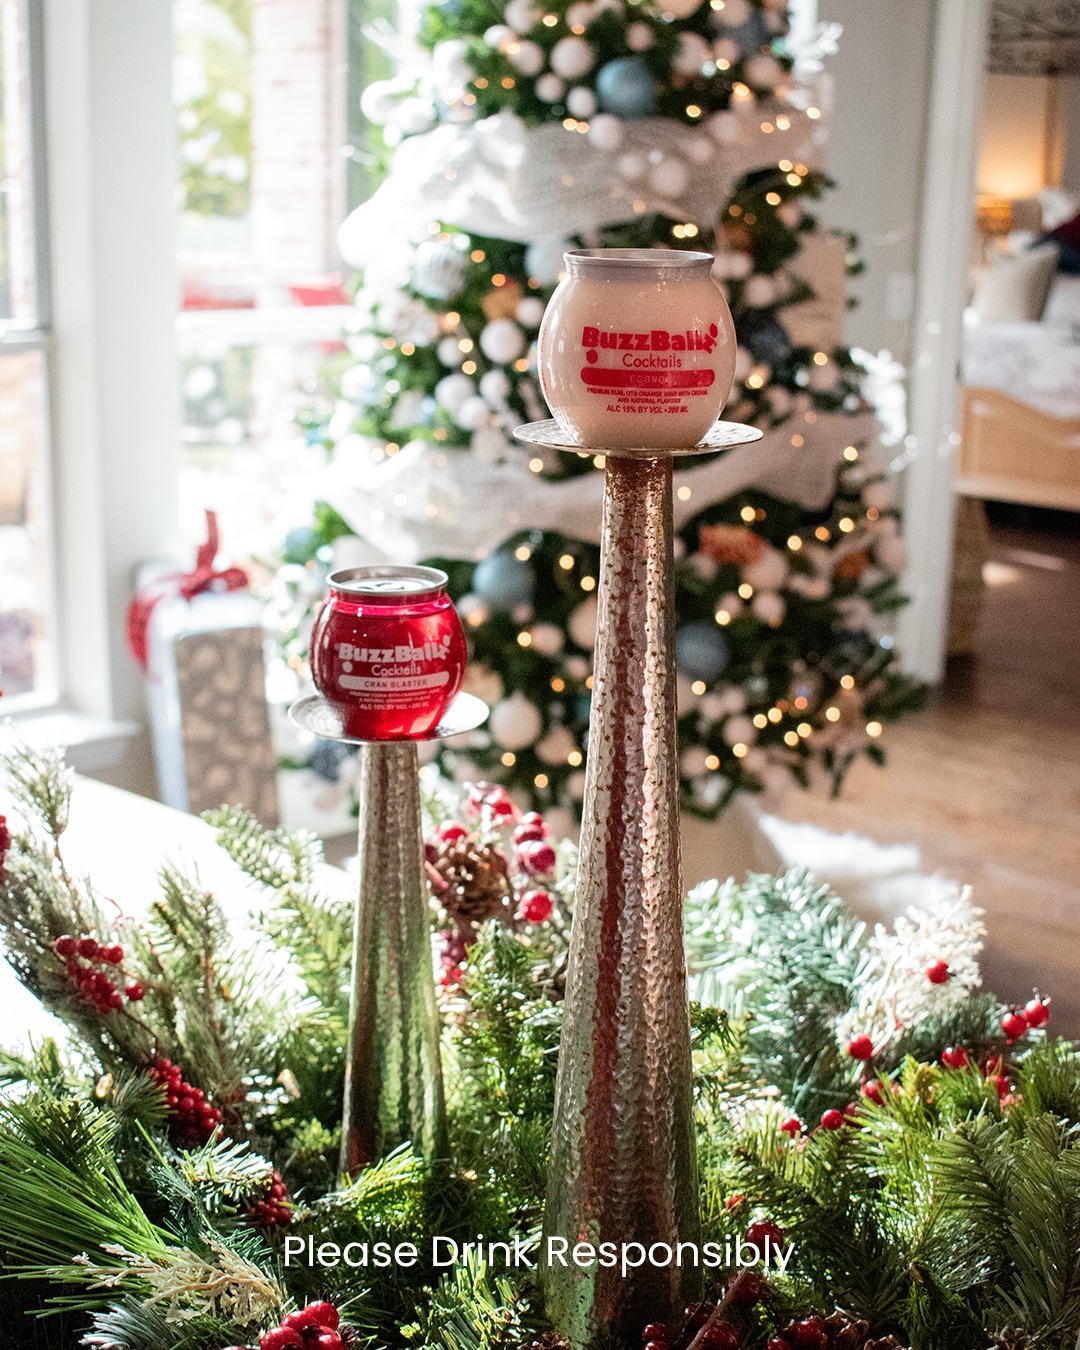 Who ever said your drink can't be a decoration? BuzzBallz make quite a nice centerpiece